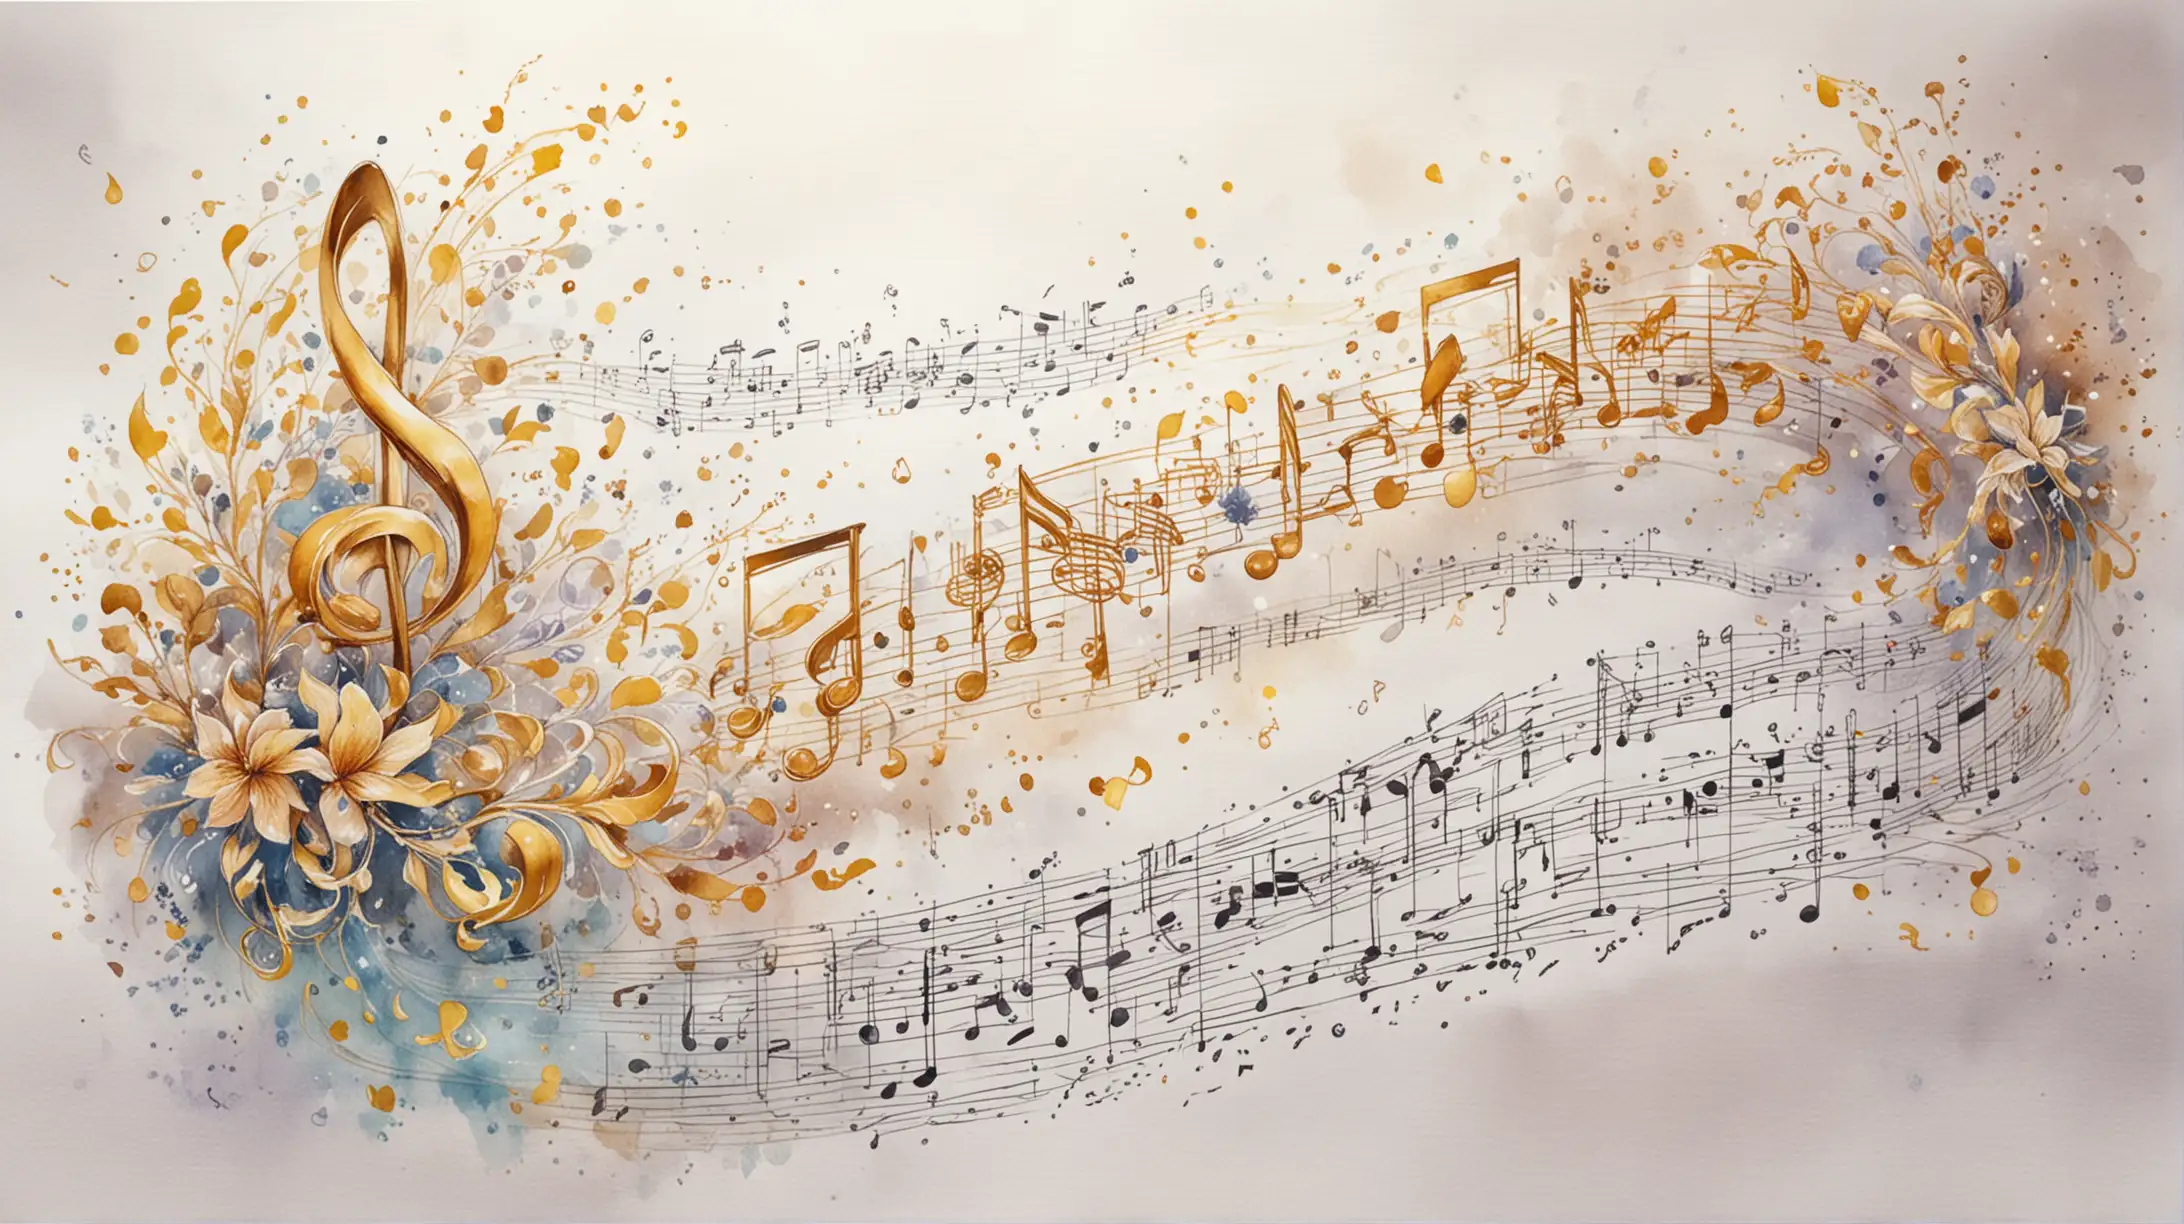 Whimsical Anime Watercolor Illustration Spring Waltz with Flying Golden Notes